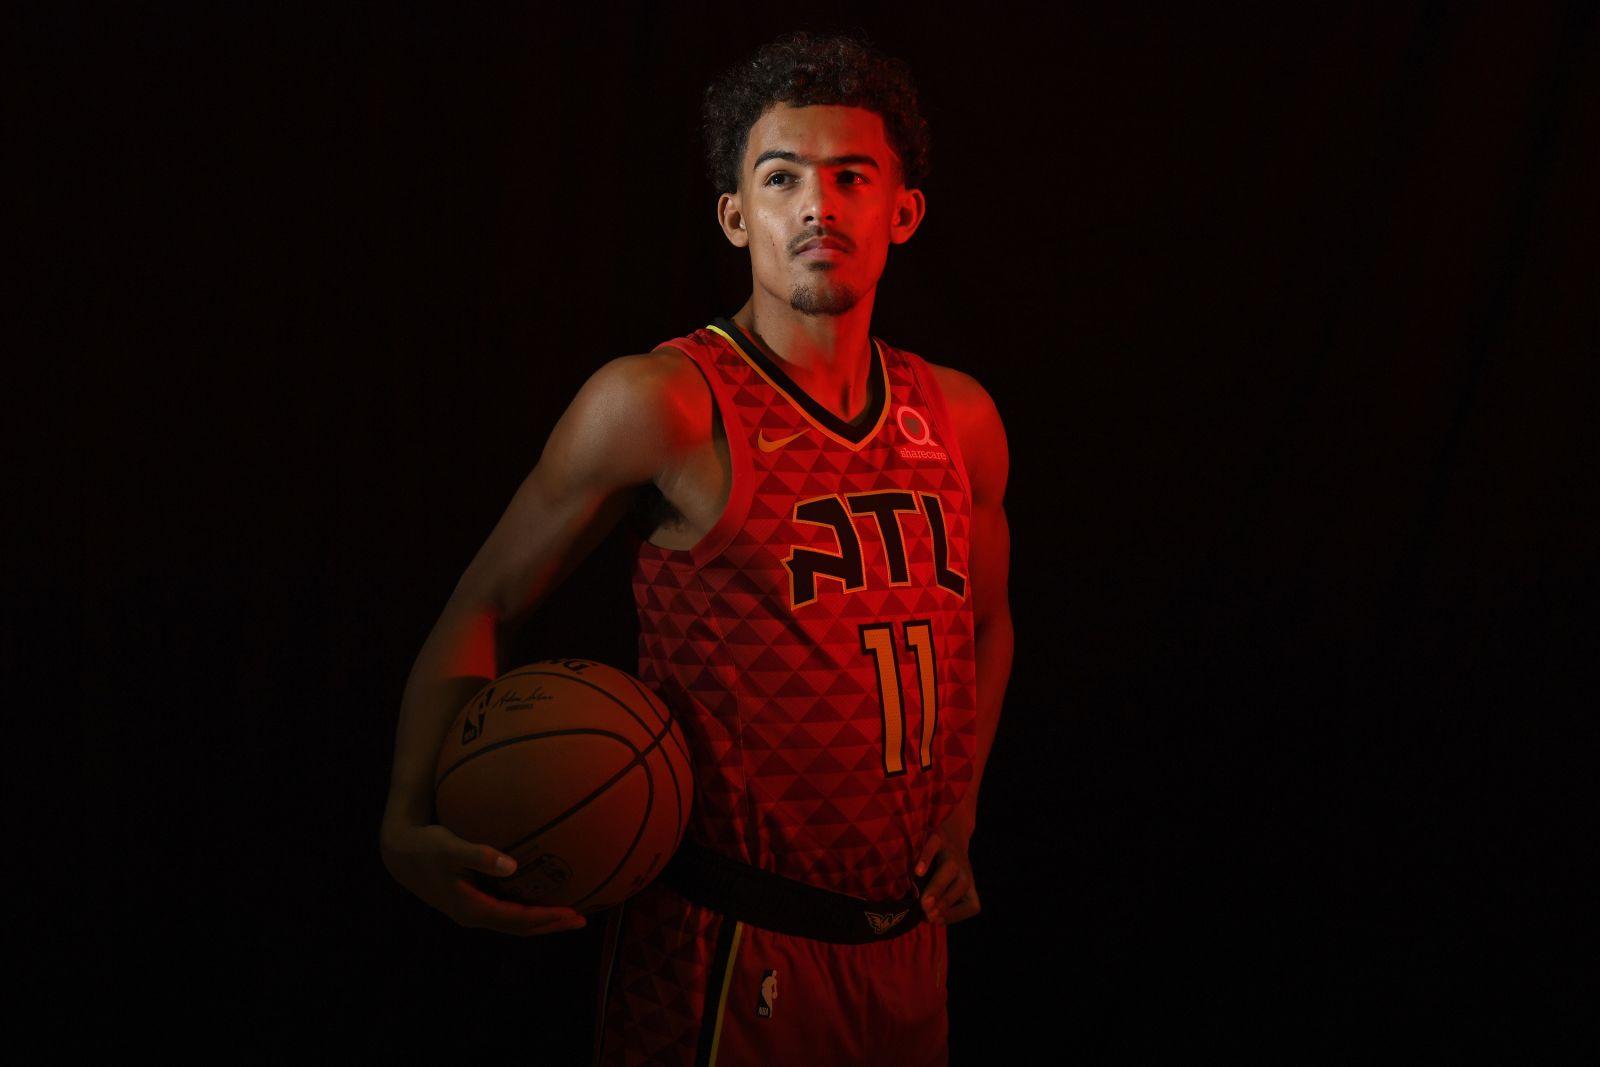 Atlanta Hawks: Trae Young Named Best Shooter & Playmaker